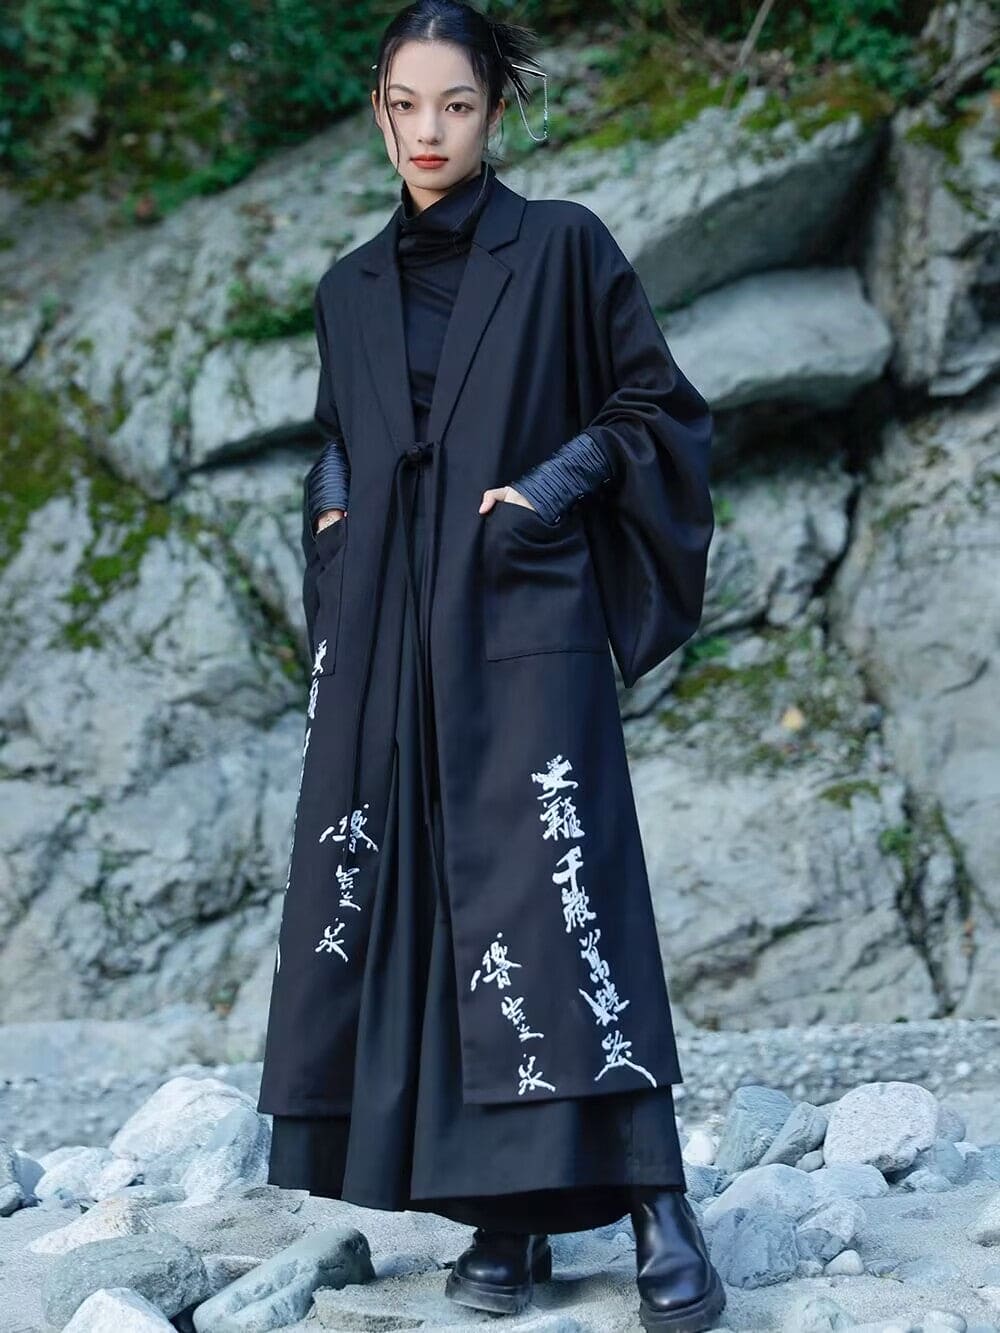 Modern Chinese clothes featuring a black hanfu coat for men, a blend of traditional hanfu menswear and Tang dynasty clothing with a modernized hanfu style, suitable for casual wear or winter hanfu style. The male model is also wearing Chinese cloak and hanfu with pants, depicting a Chinese warrior outfit. The photo indicates where to buy hanfu, including hanfu Amazon and oriental clothing stores near you